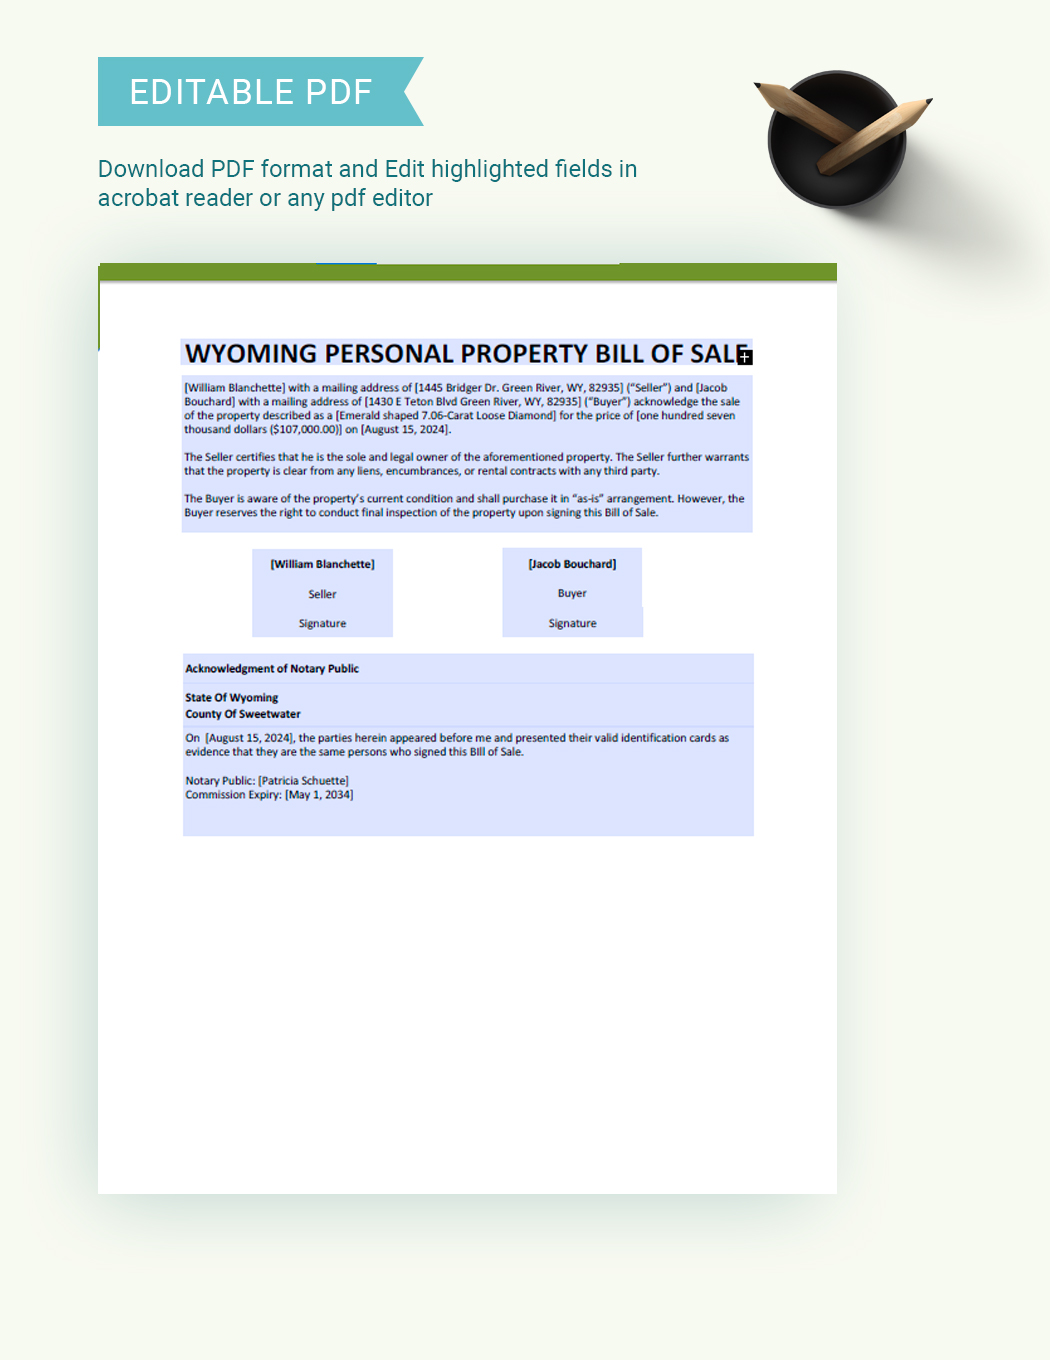 Wyoming Personal Property Bill Of Sale Template